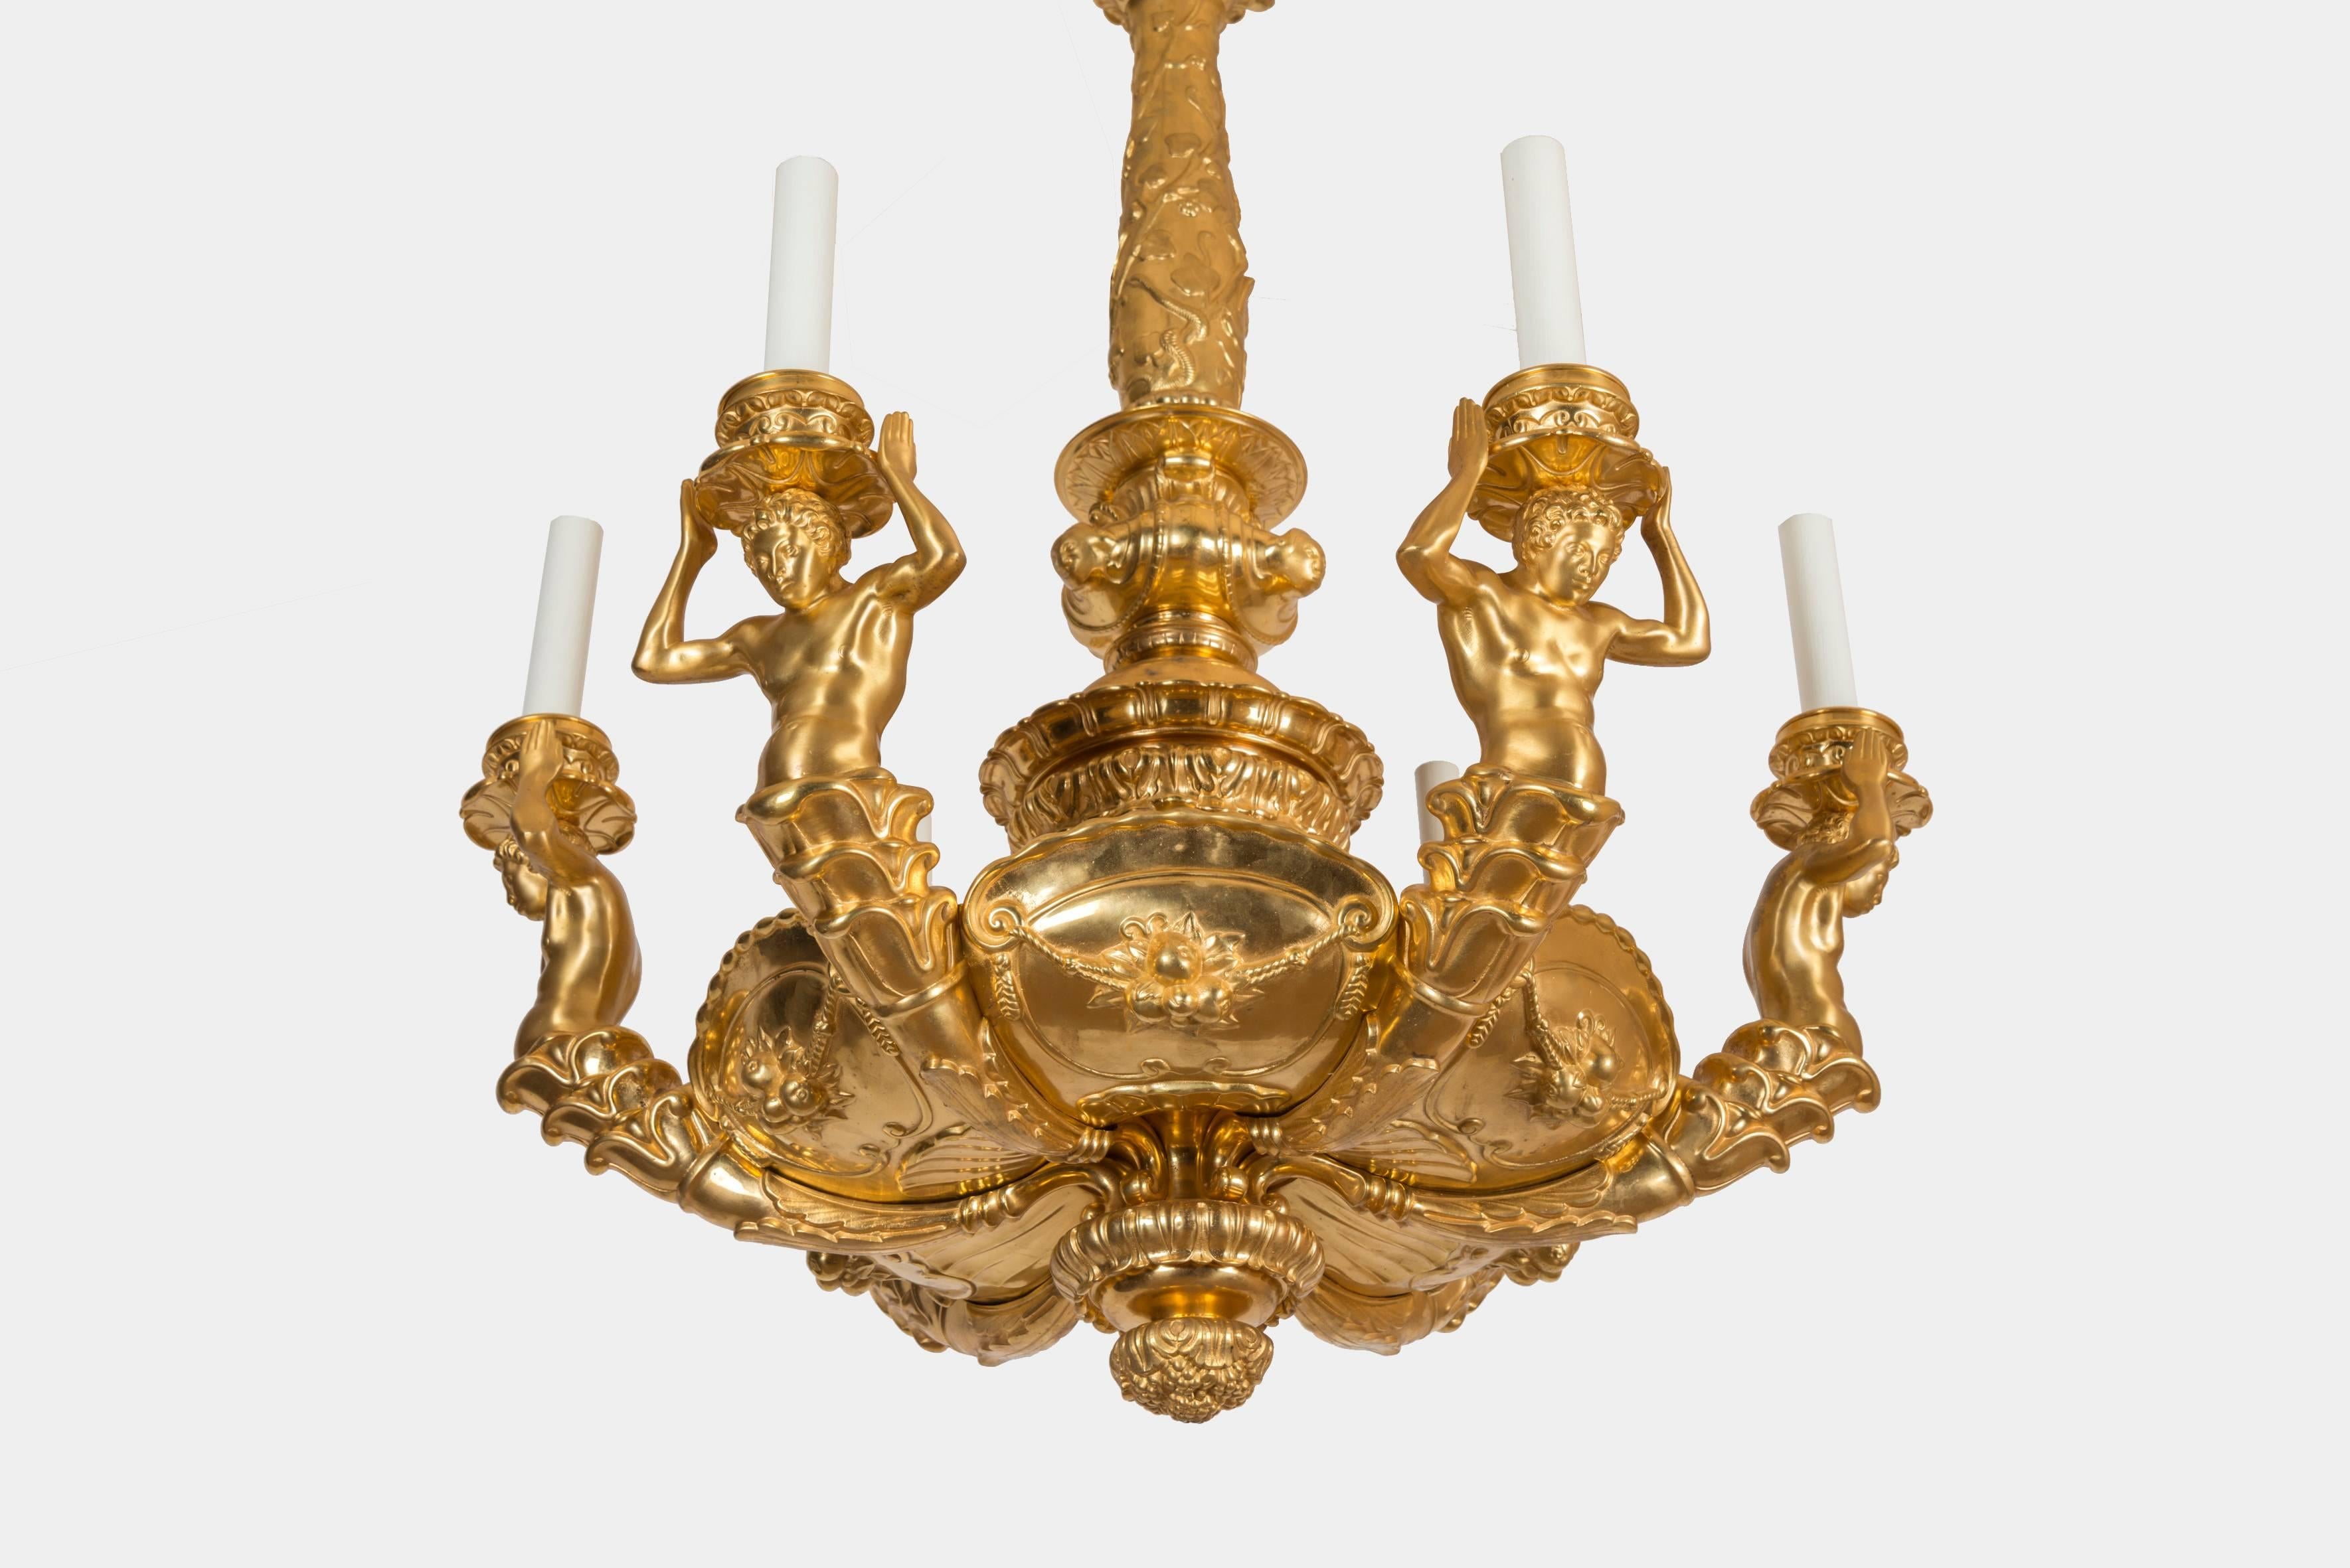 Gilt bronze chandelier with six lights supported at arm's length by sculpted men.